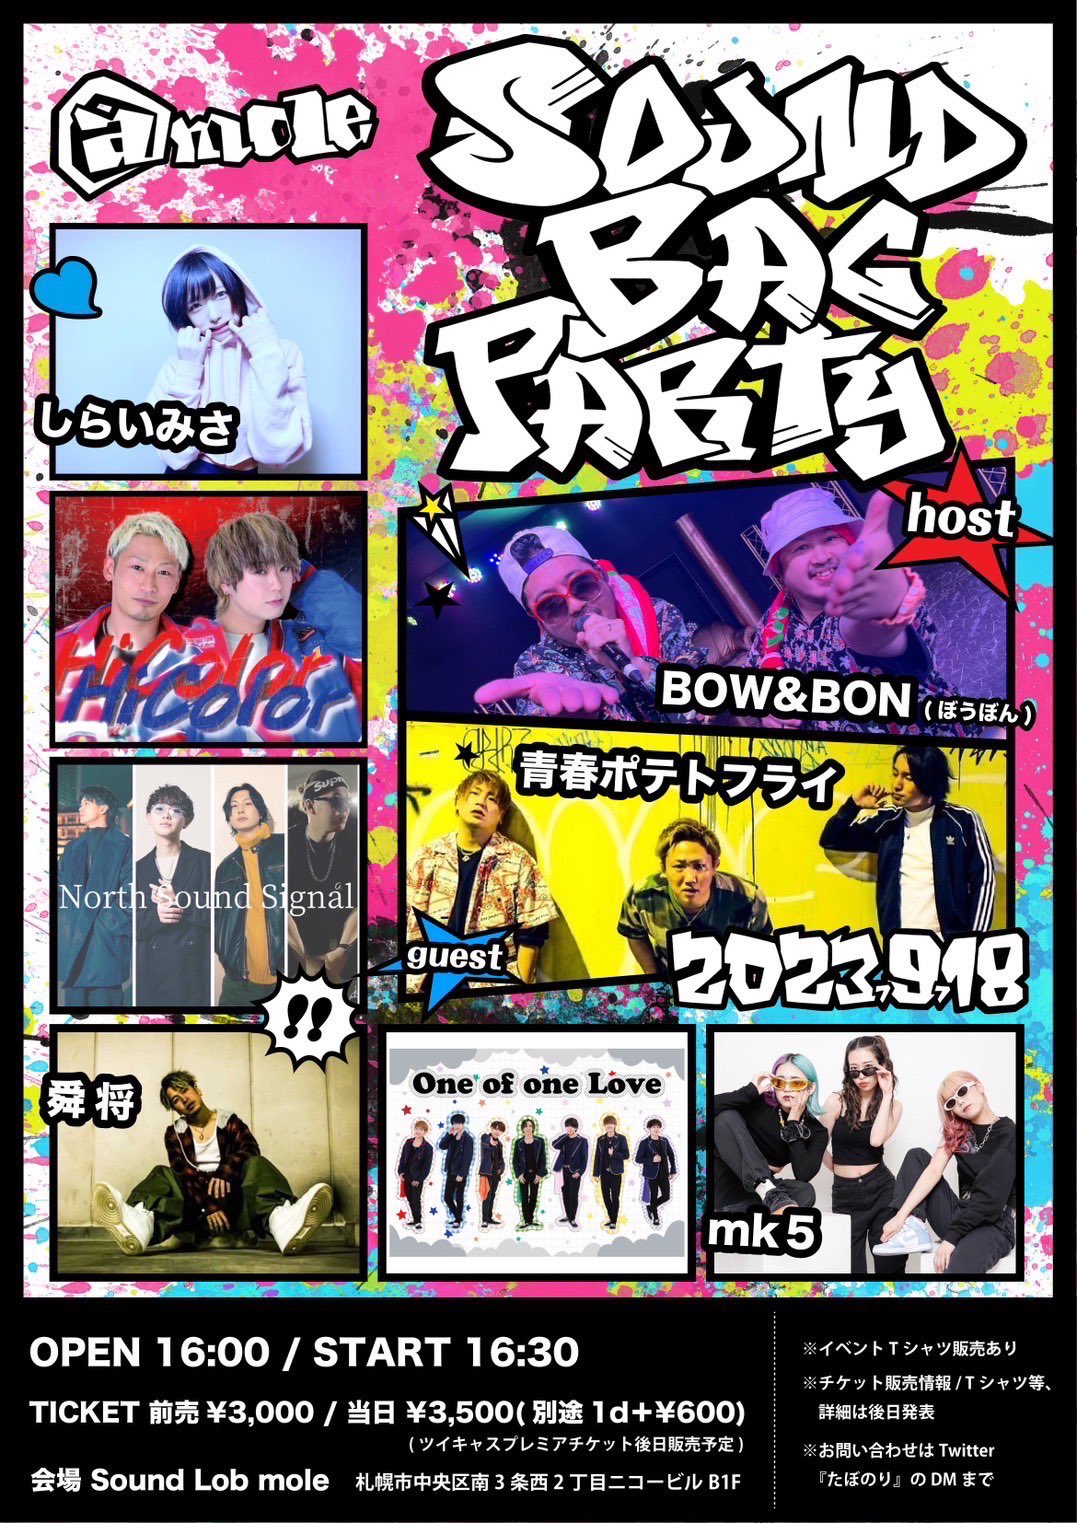 9/18 『SOUND BAG PARTY』ゲスト出演決定！